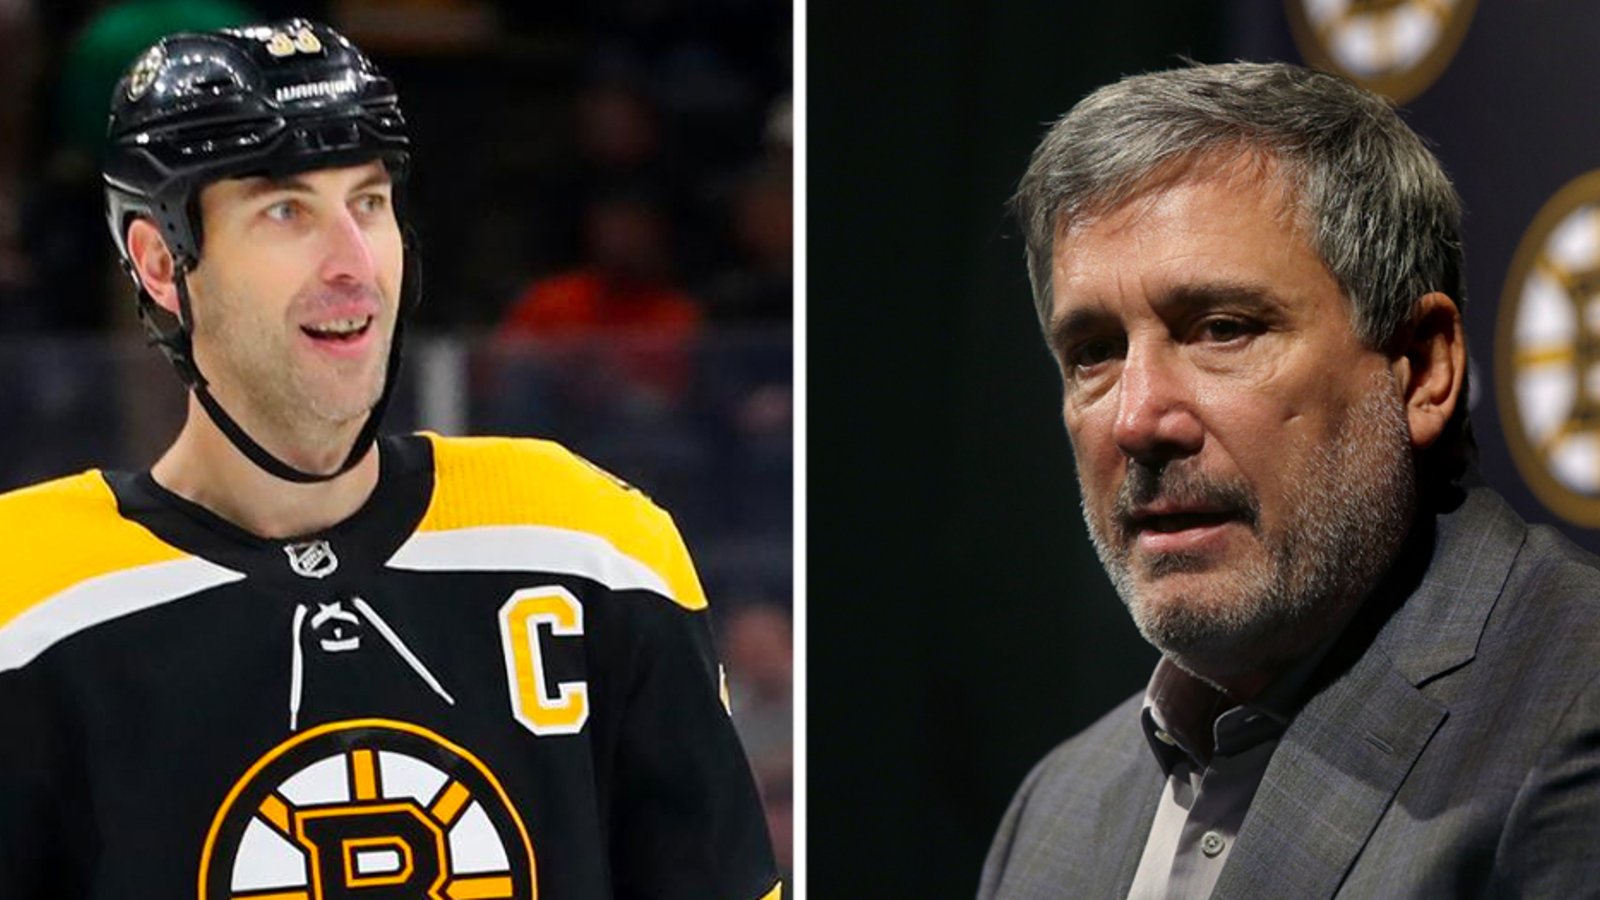 Chara admits the Bruins pushed him out and he had no choice but to leave